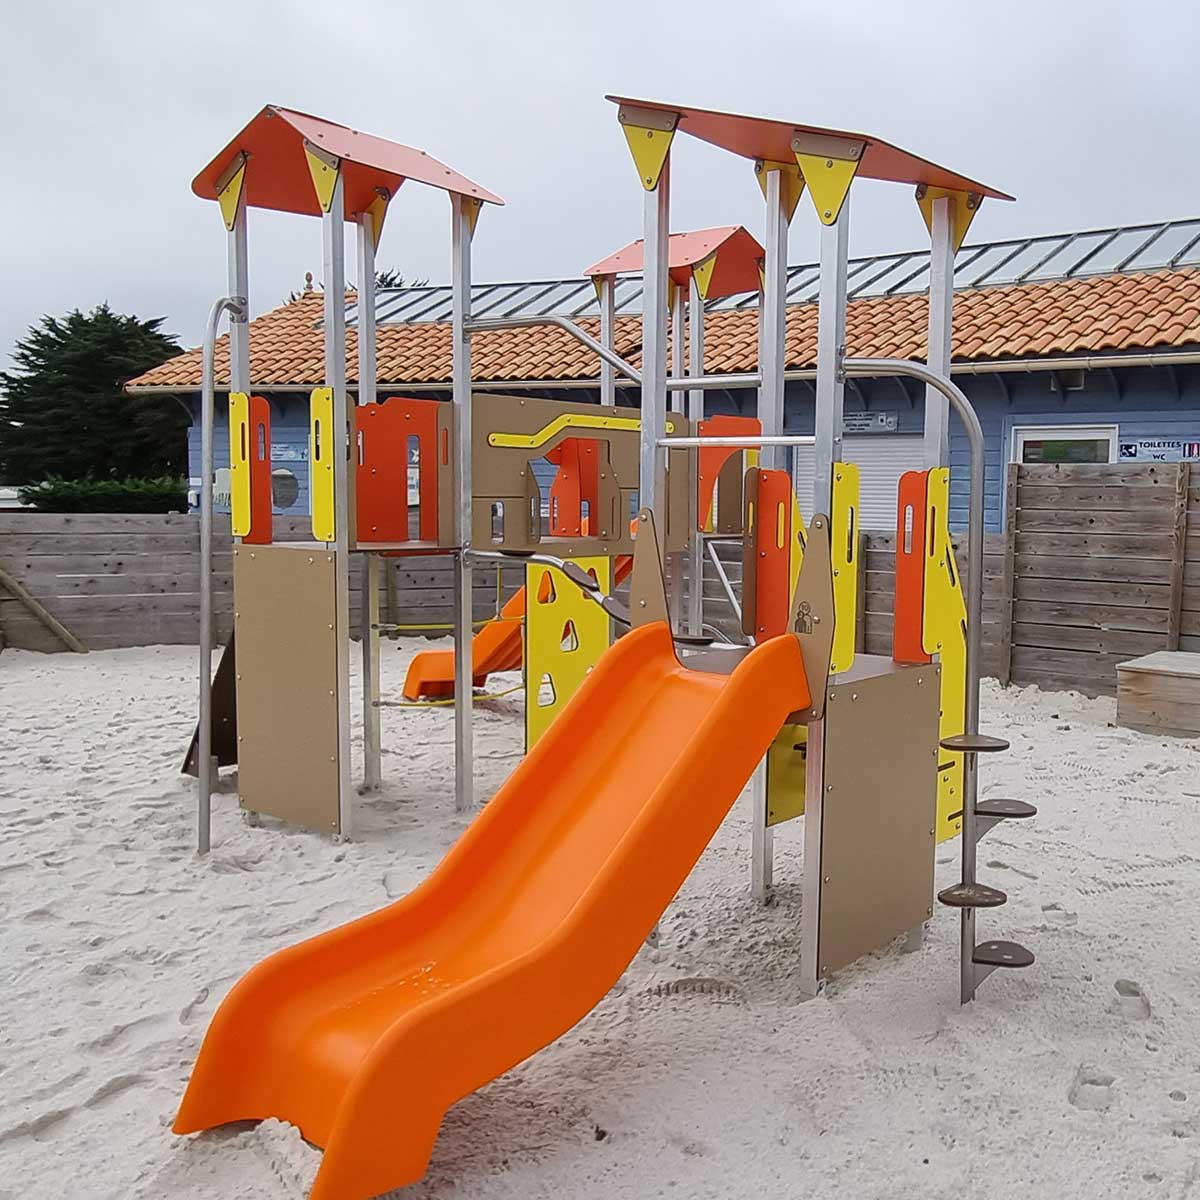 Play structure with brightly colored 3-tower slide